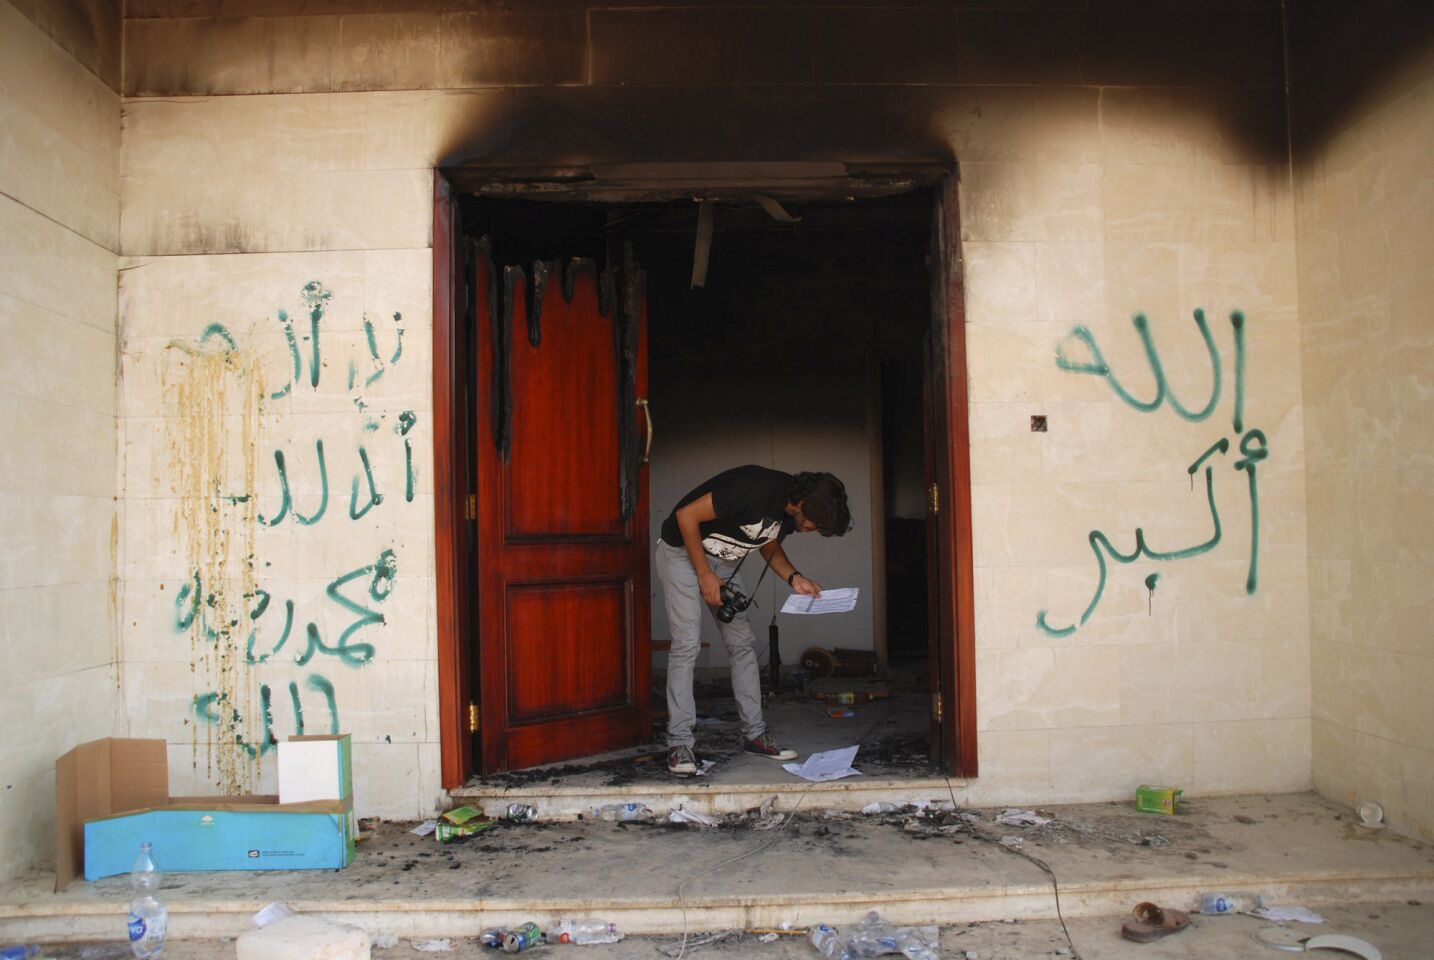 A man looks at documents at the U.S. Consulate in Benghazi, Libya, after an attack that killed four Americans, including U.S. Ambassador J. Christopher Stevens. The graffiti reads "no God but God," "God is great" and "Muhammad is the Prophet."